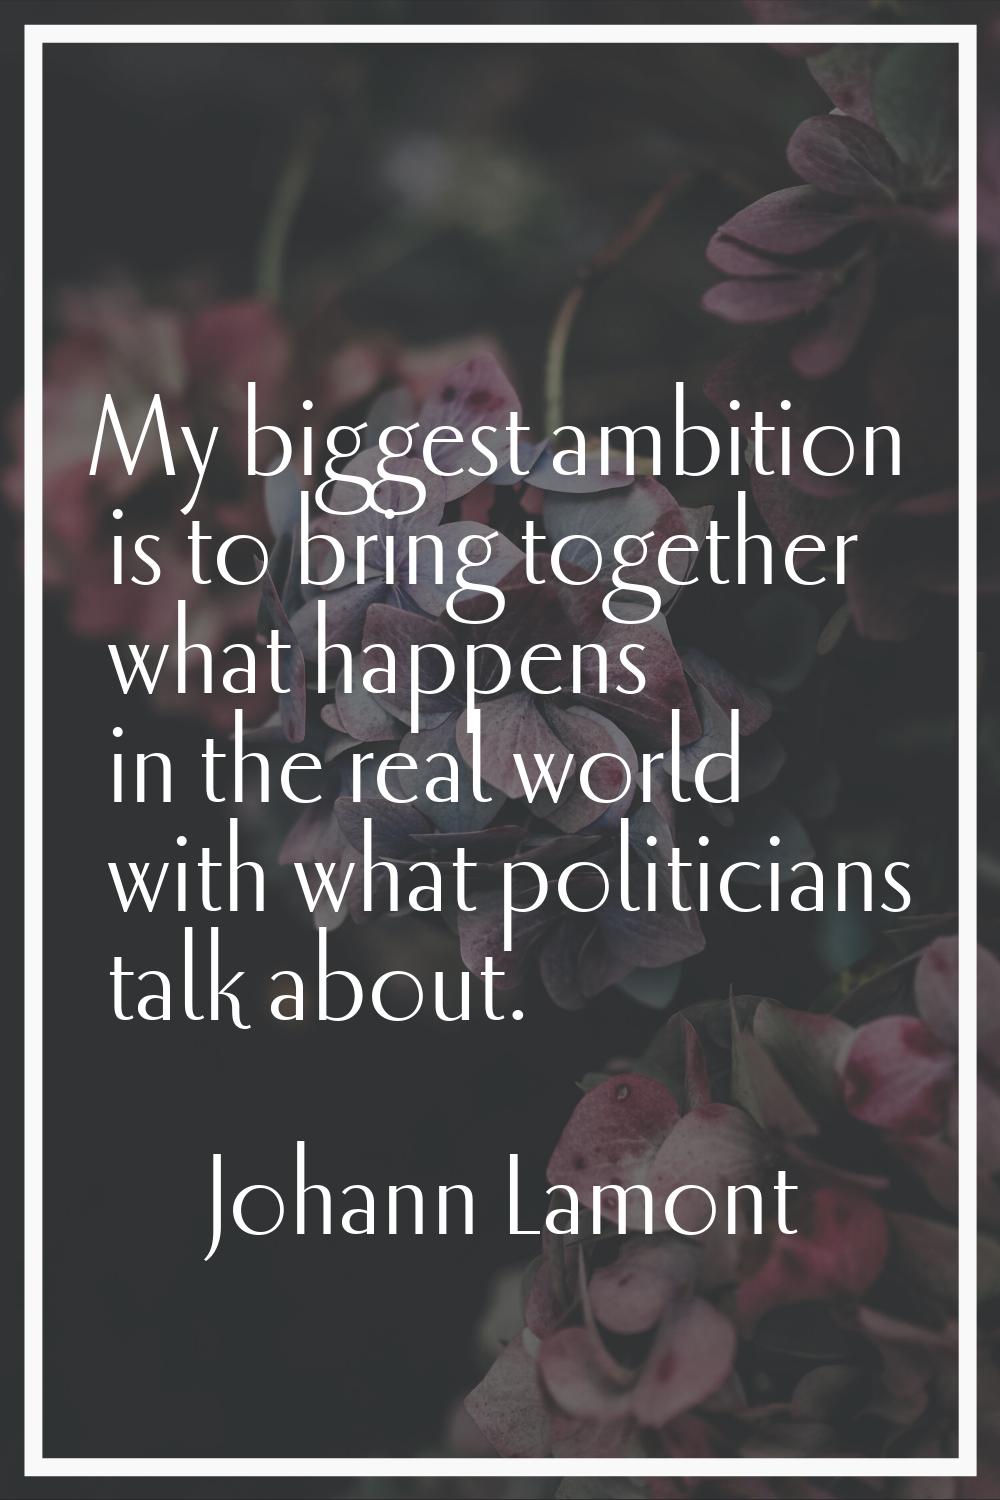 My biggest ambition is to bring together what happens in the real world with what politicians talk 